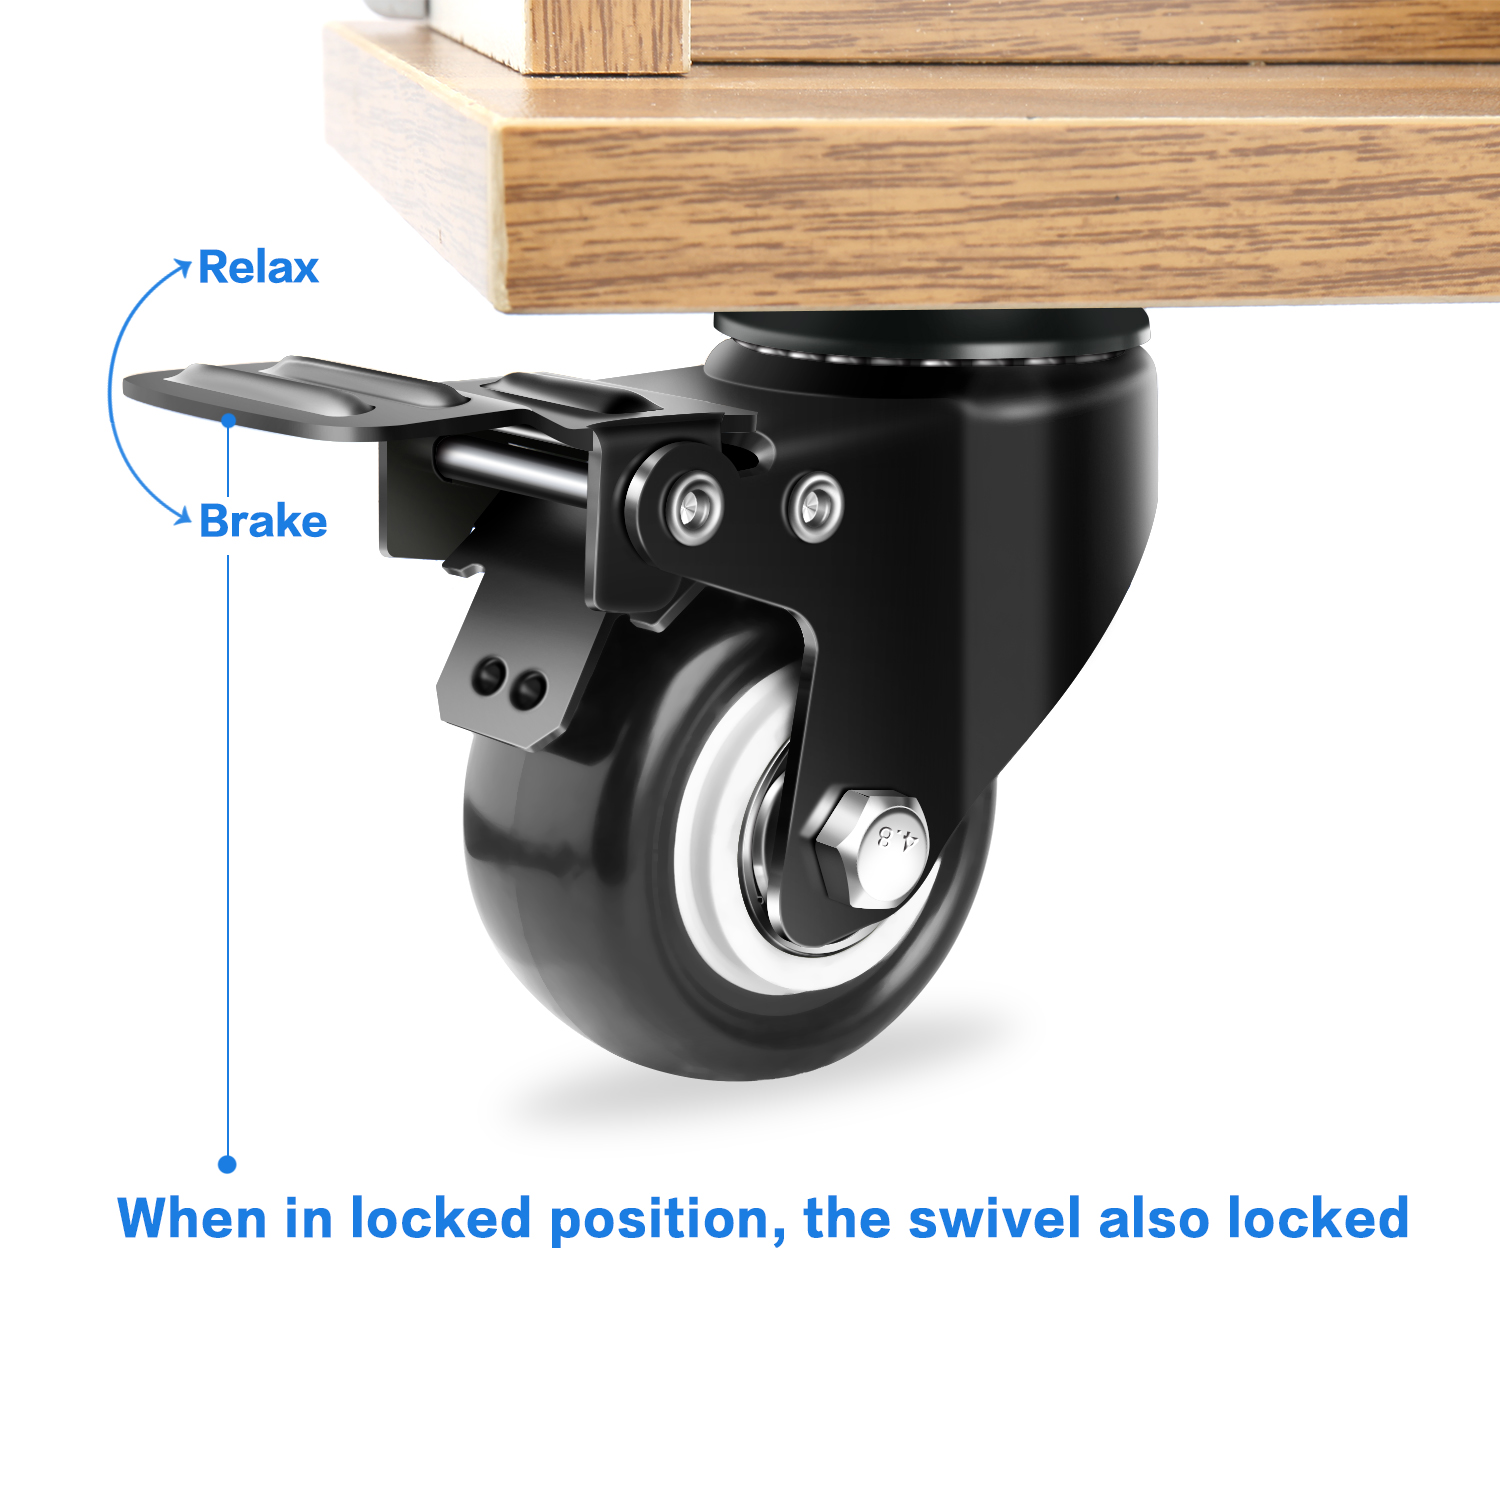 2" Swivel Caster Wheels with Safety Dual Locking and Polyurethane Foam No Noise Wheels, Heavy Duty - 150 Lbs Per Caster (Pack of 4)